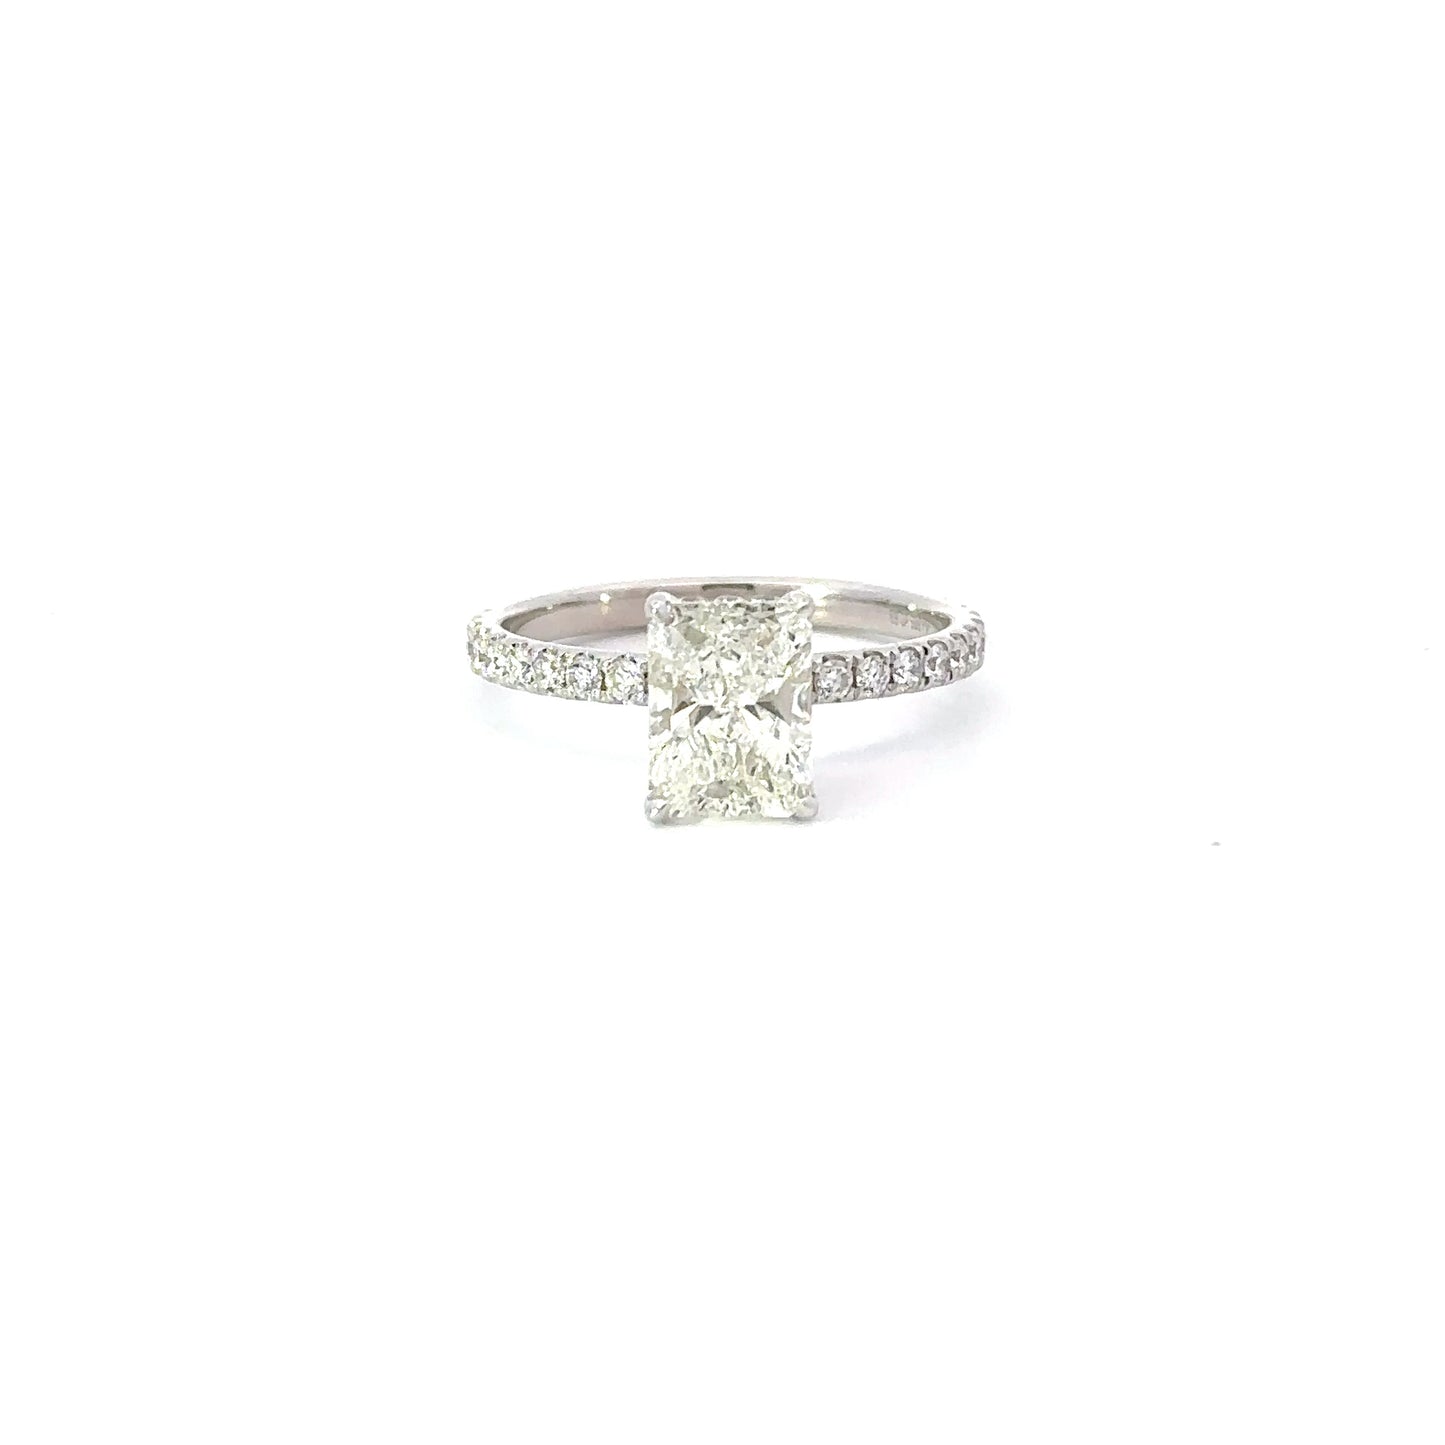 1.51 Carat Radiant Natural Diamond Engagement Ring with Signature Setting - Happy Jewelers Fine Jewelry Lifetime Warranty